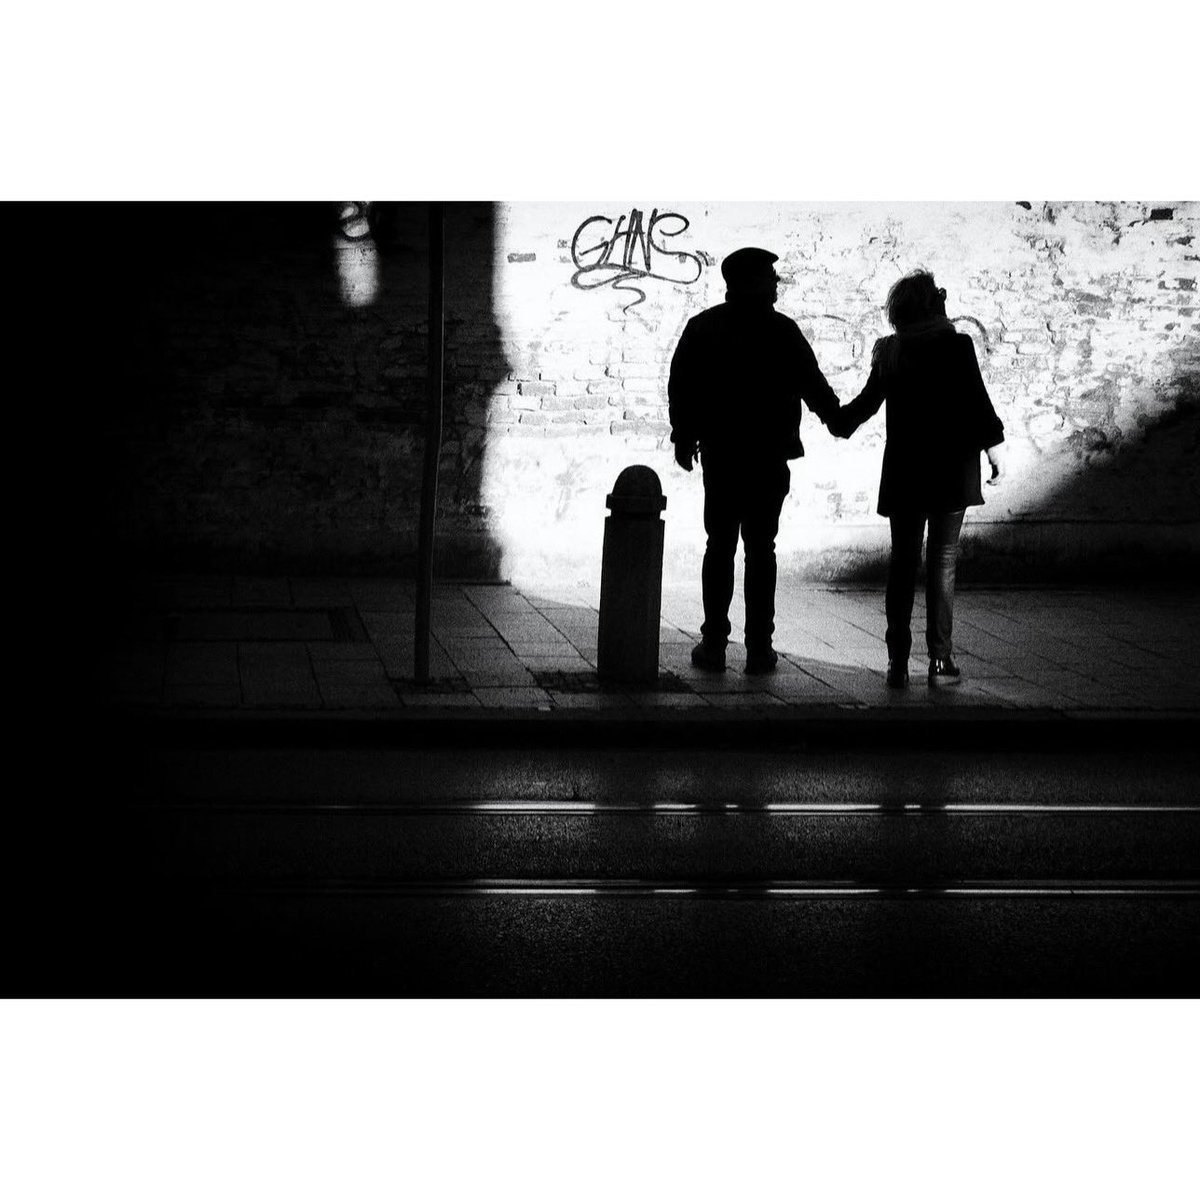 This Street Shot was taken by @sandy_jendryka We want to see all genres of Street Shots. Please continue to use #ssicollaborative and follow @streetshotsinternational for the chance to be featured. #StreetPhotography #monochrome #filmnoir #blackandwhite #bnw #silhouette